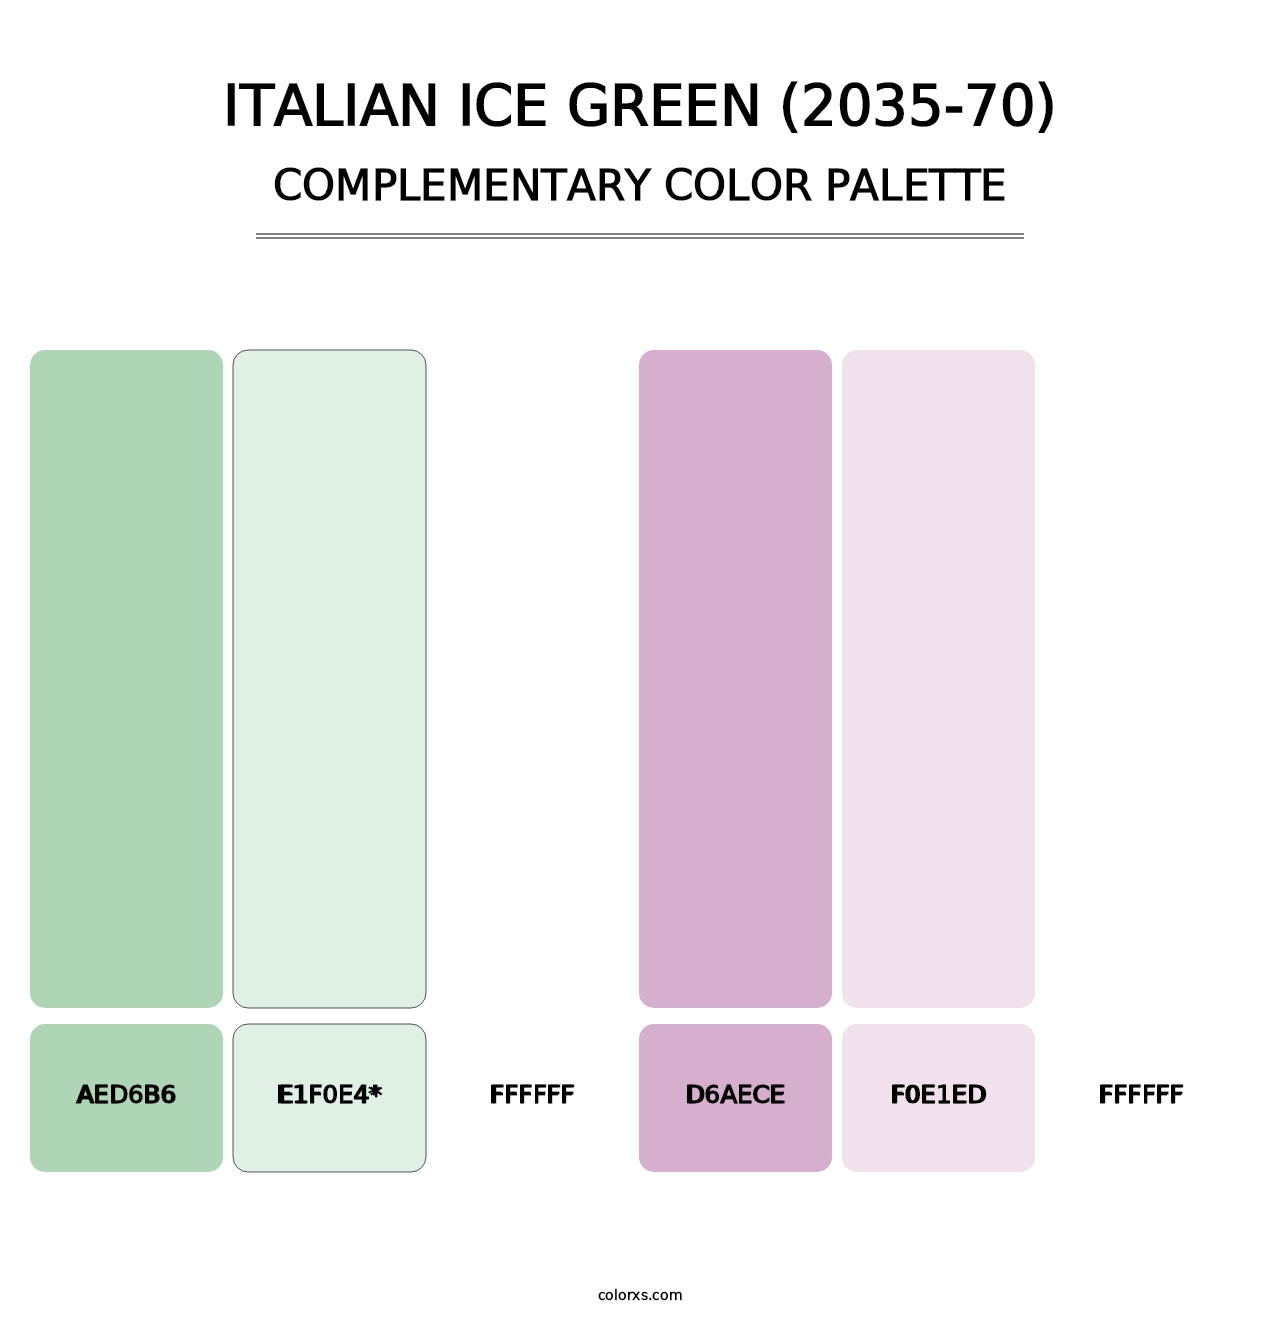 Italian Ice Green (2035-70) - Complementary Color Palette